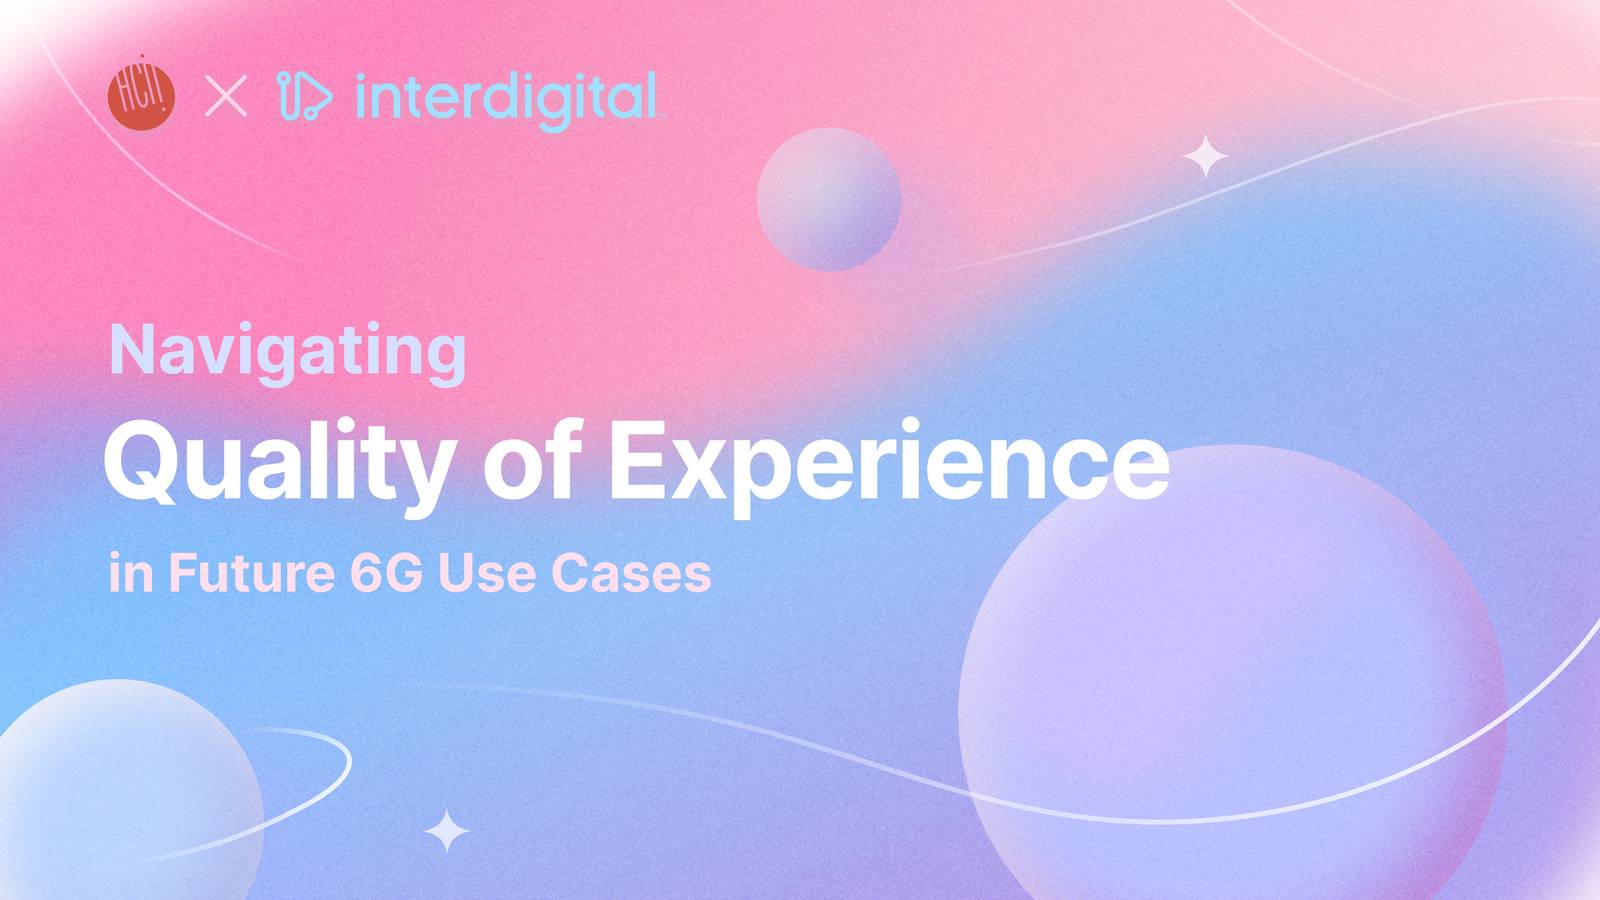 Cover image for Imagining 6G Experiences